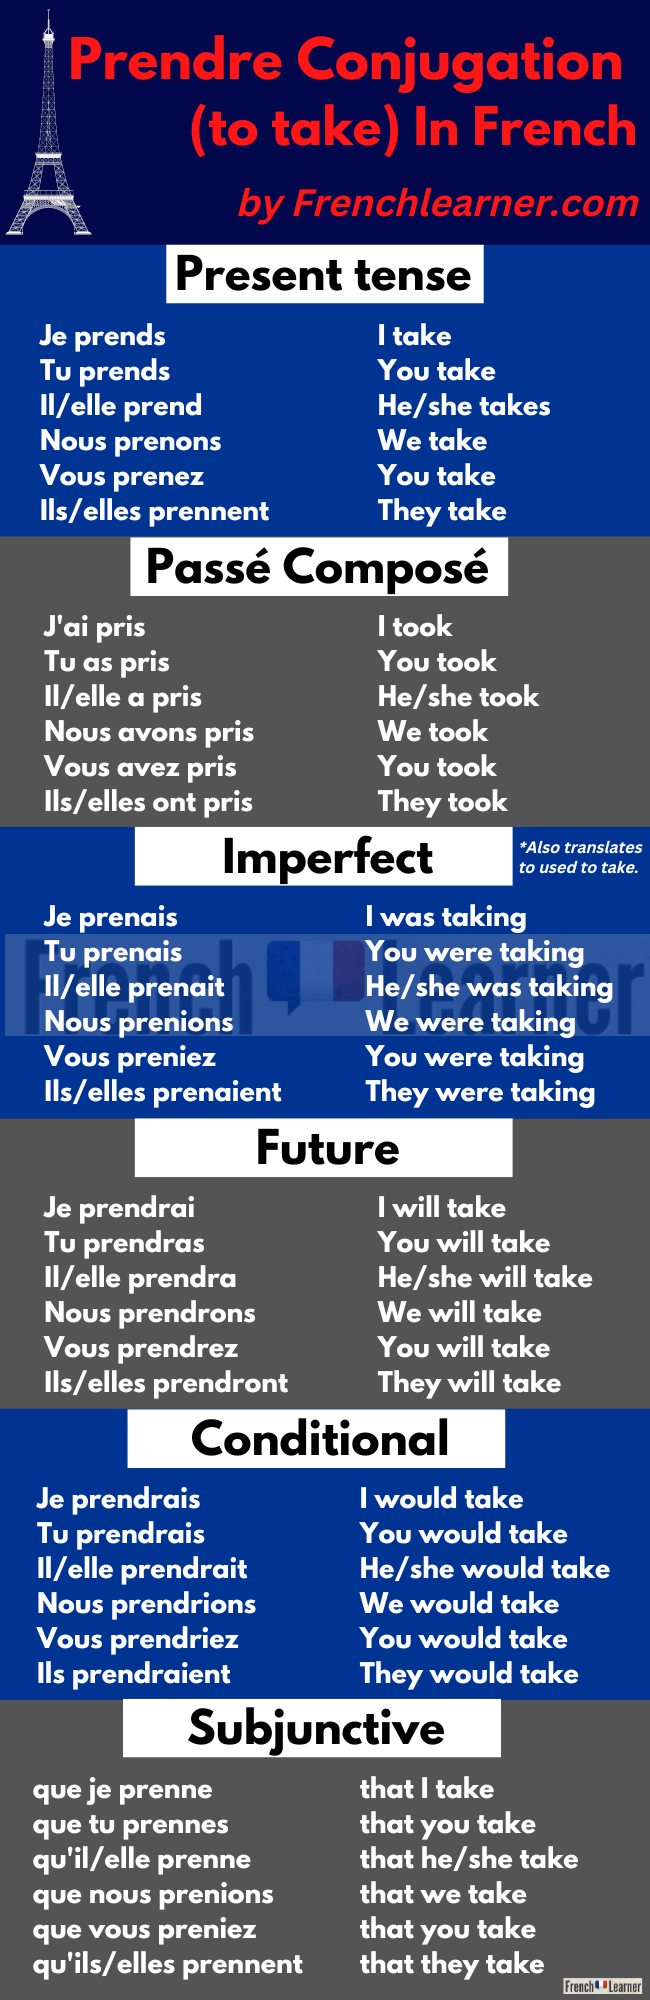 Prendre Conjugation: How To Conjugate “To Take” In French